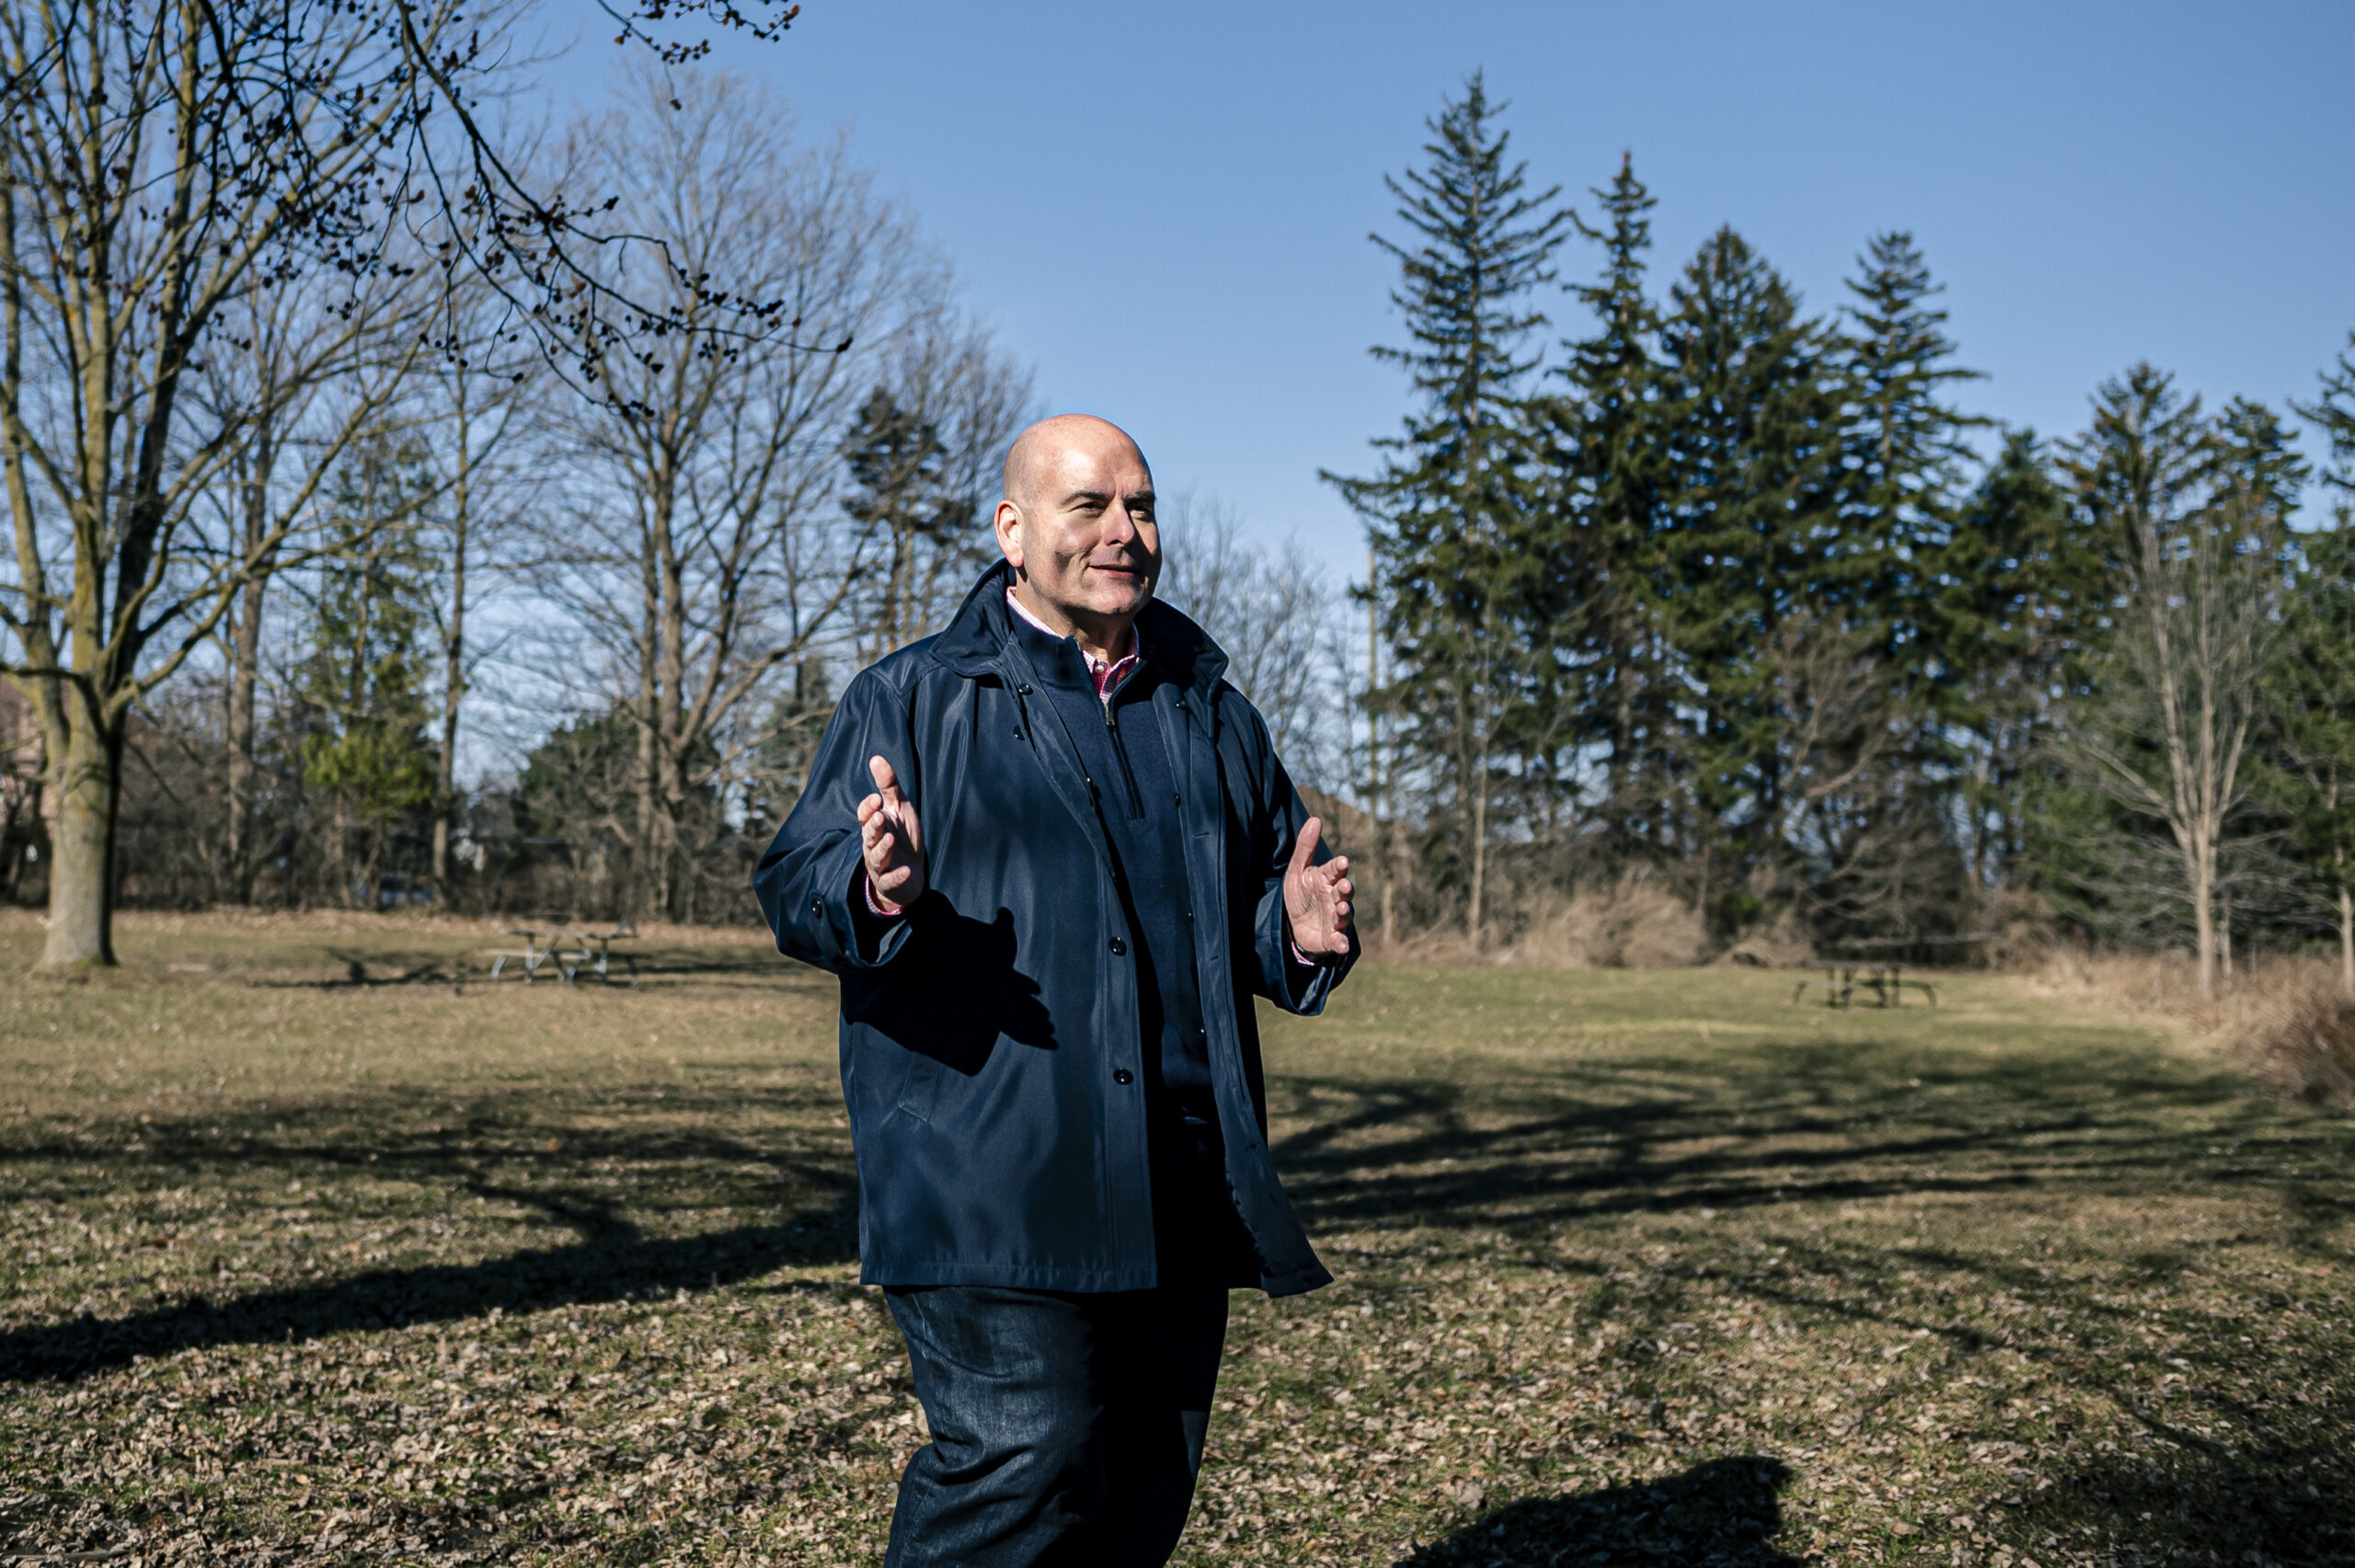 Ontario Liberal leader Steven Del Duca walks in the middle of a field with trees in the background on a sunny early spring day, gesturing with his hands, in the lead-up to the 2022 Ontario election.